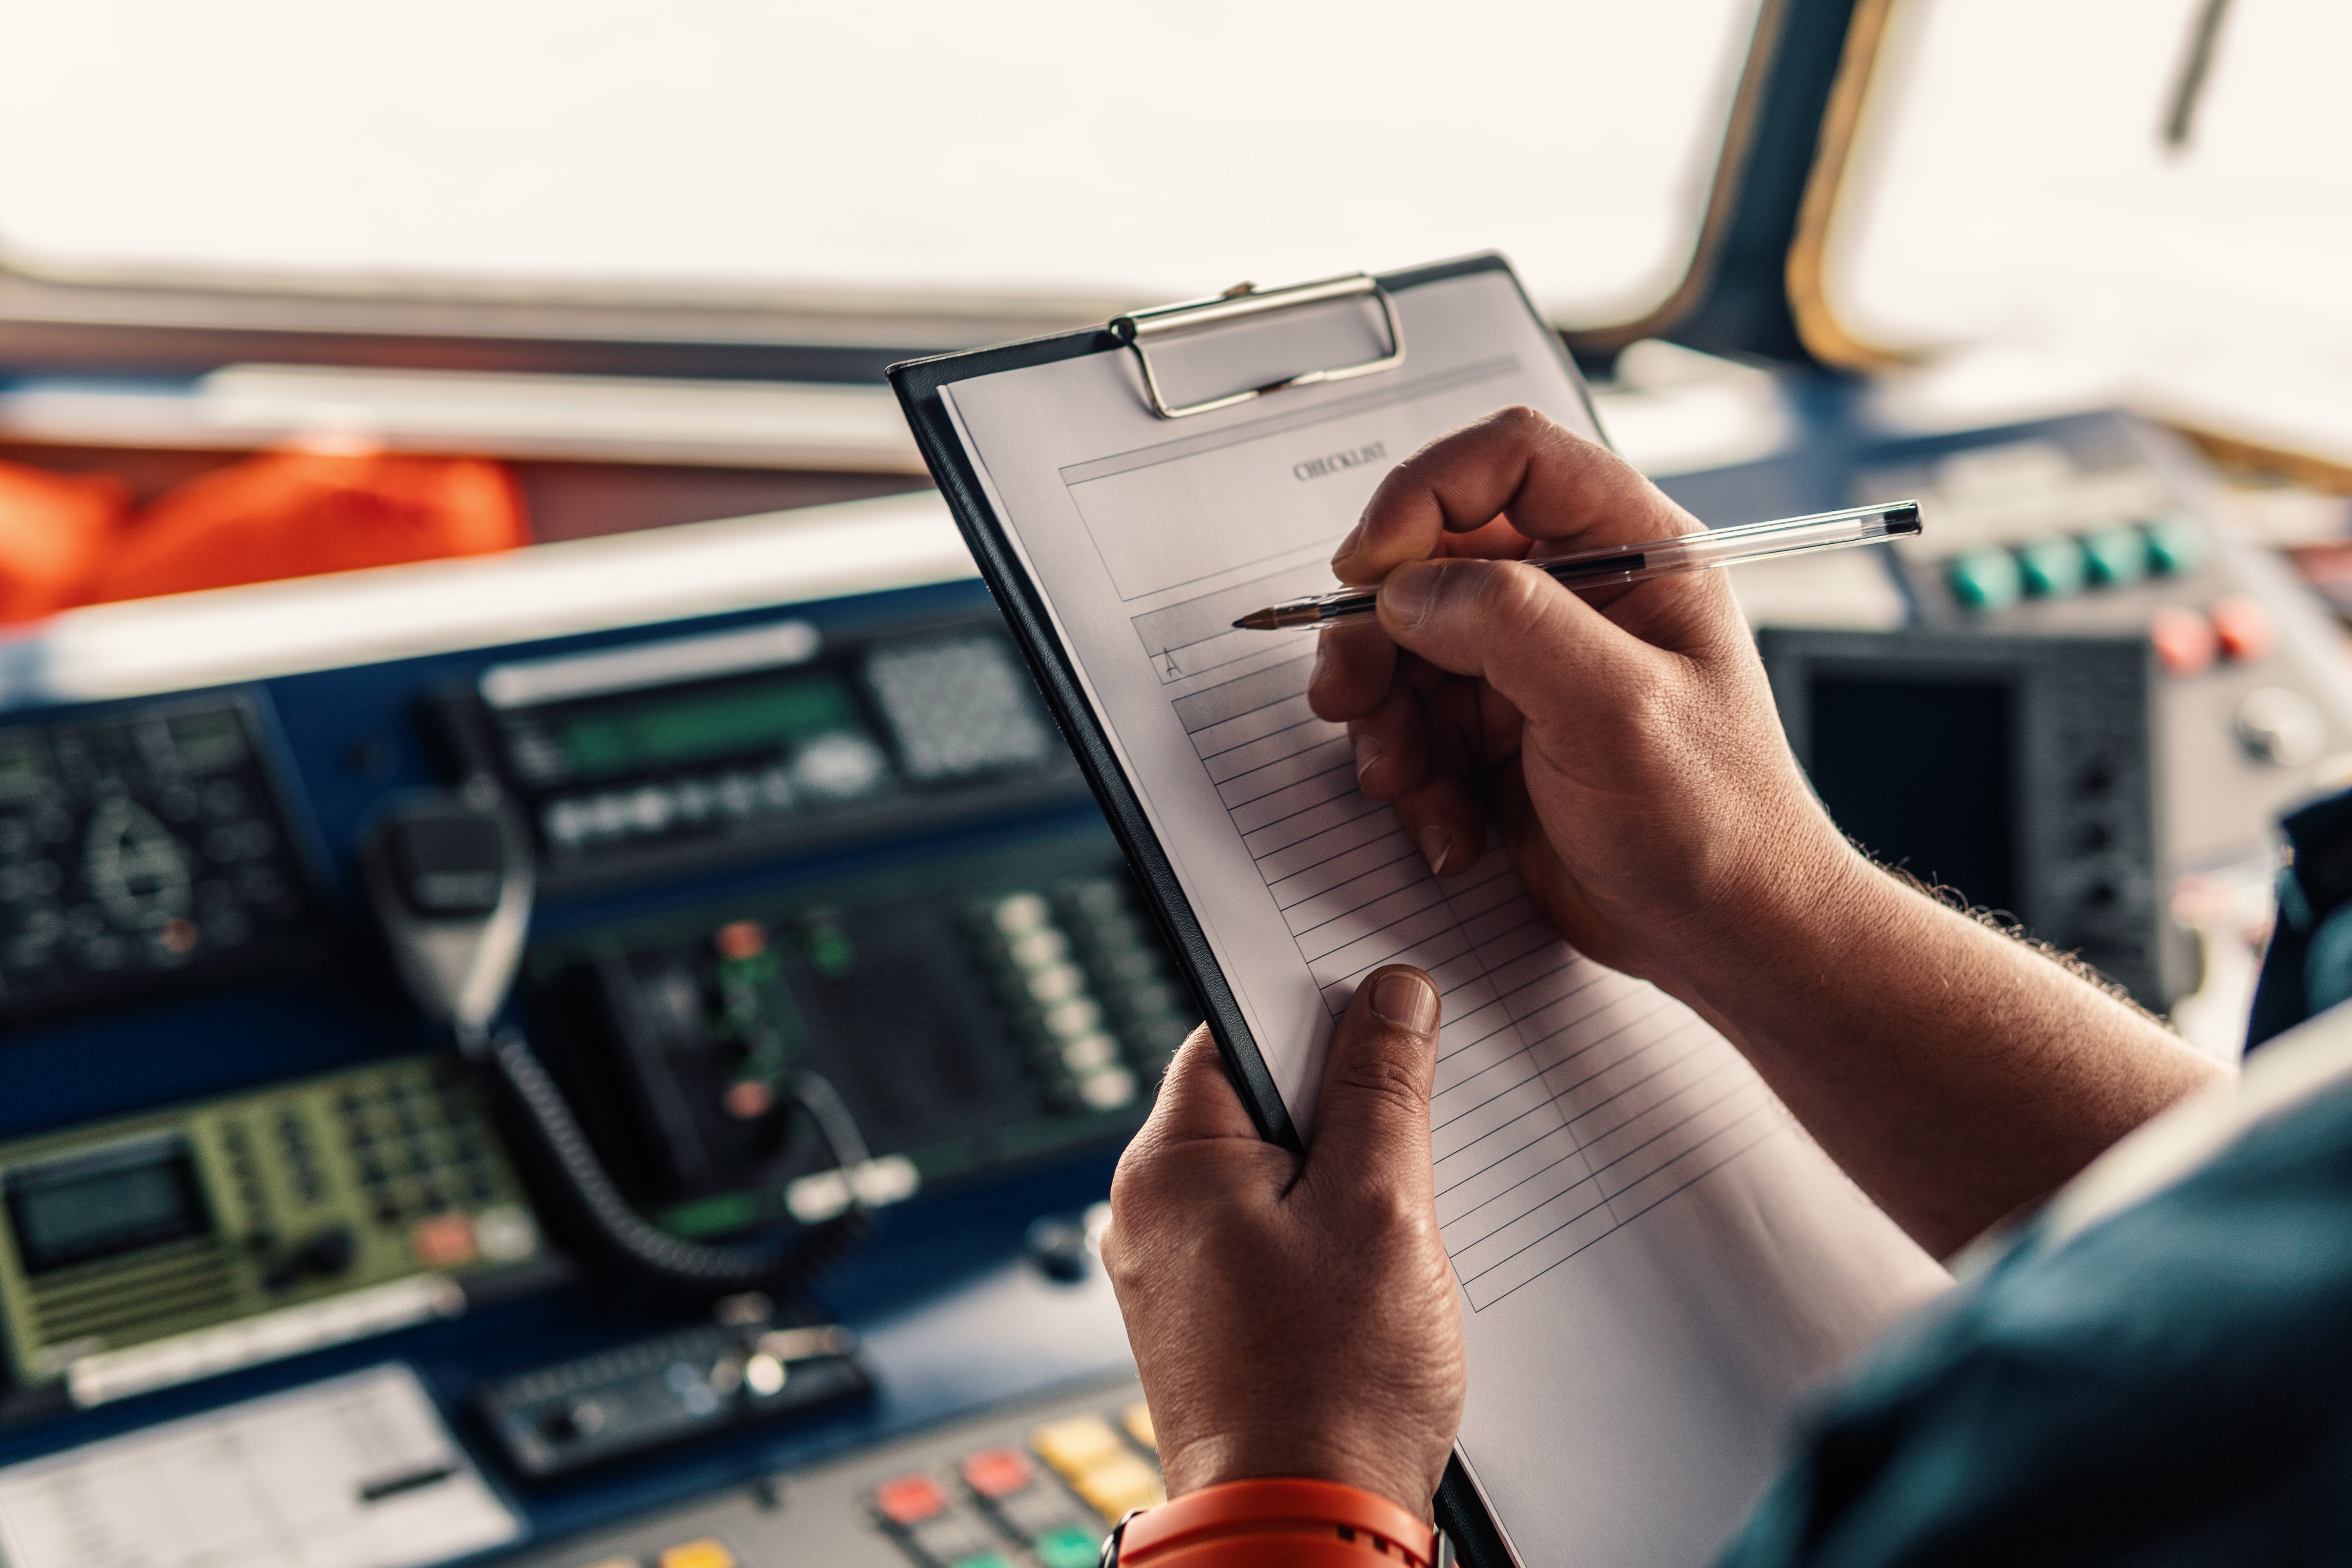 Marine navigational officer or chief mate on navigation watch on ship or vessel. He fills up checklist. Ship routine paperwork